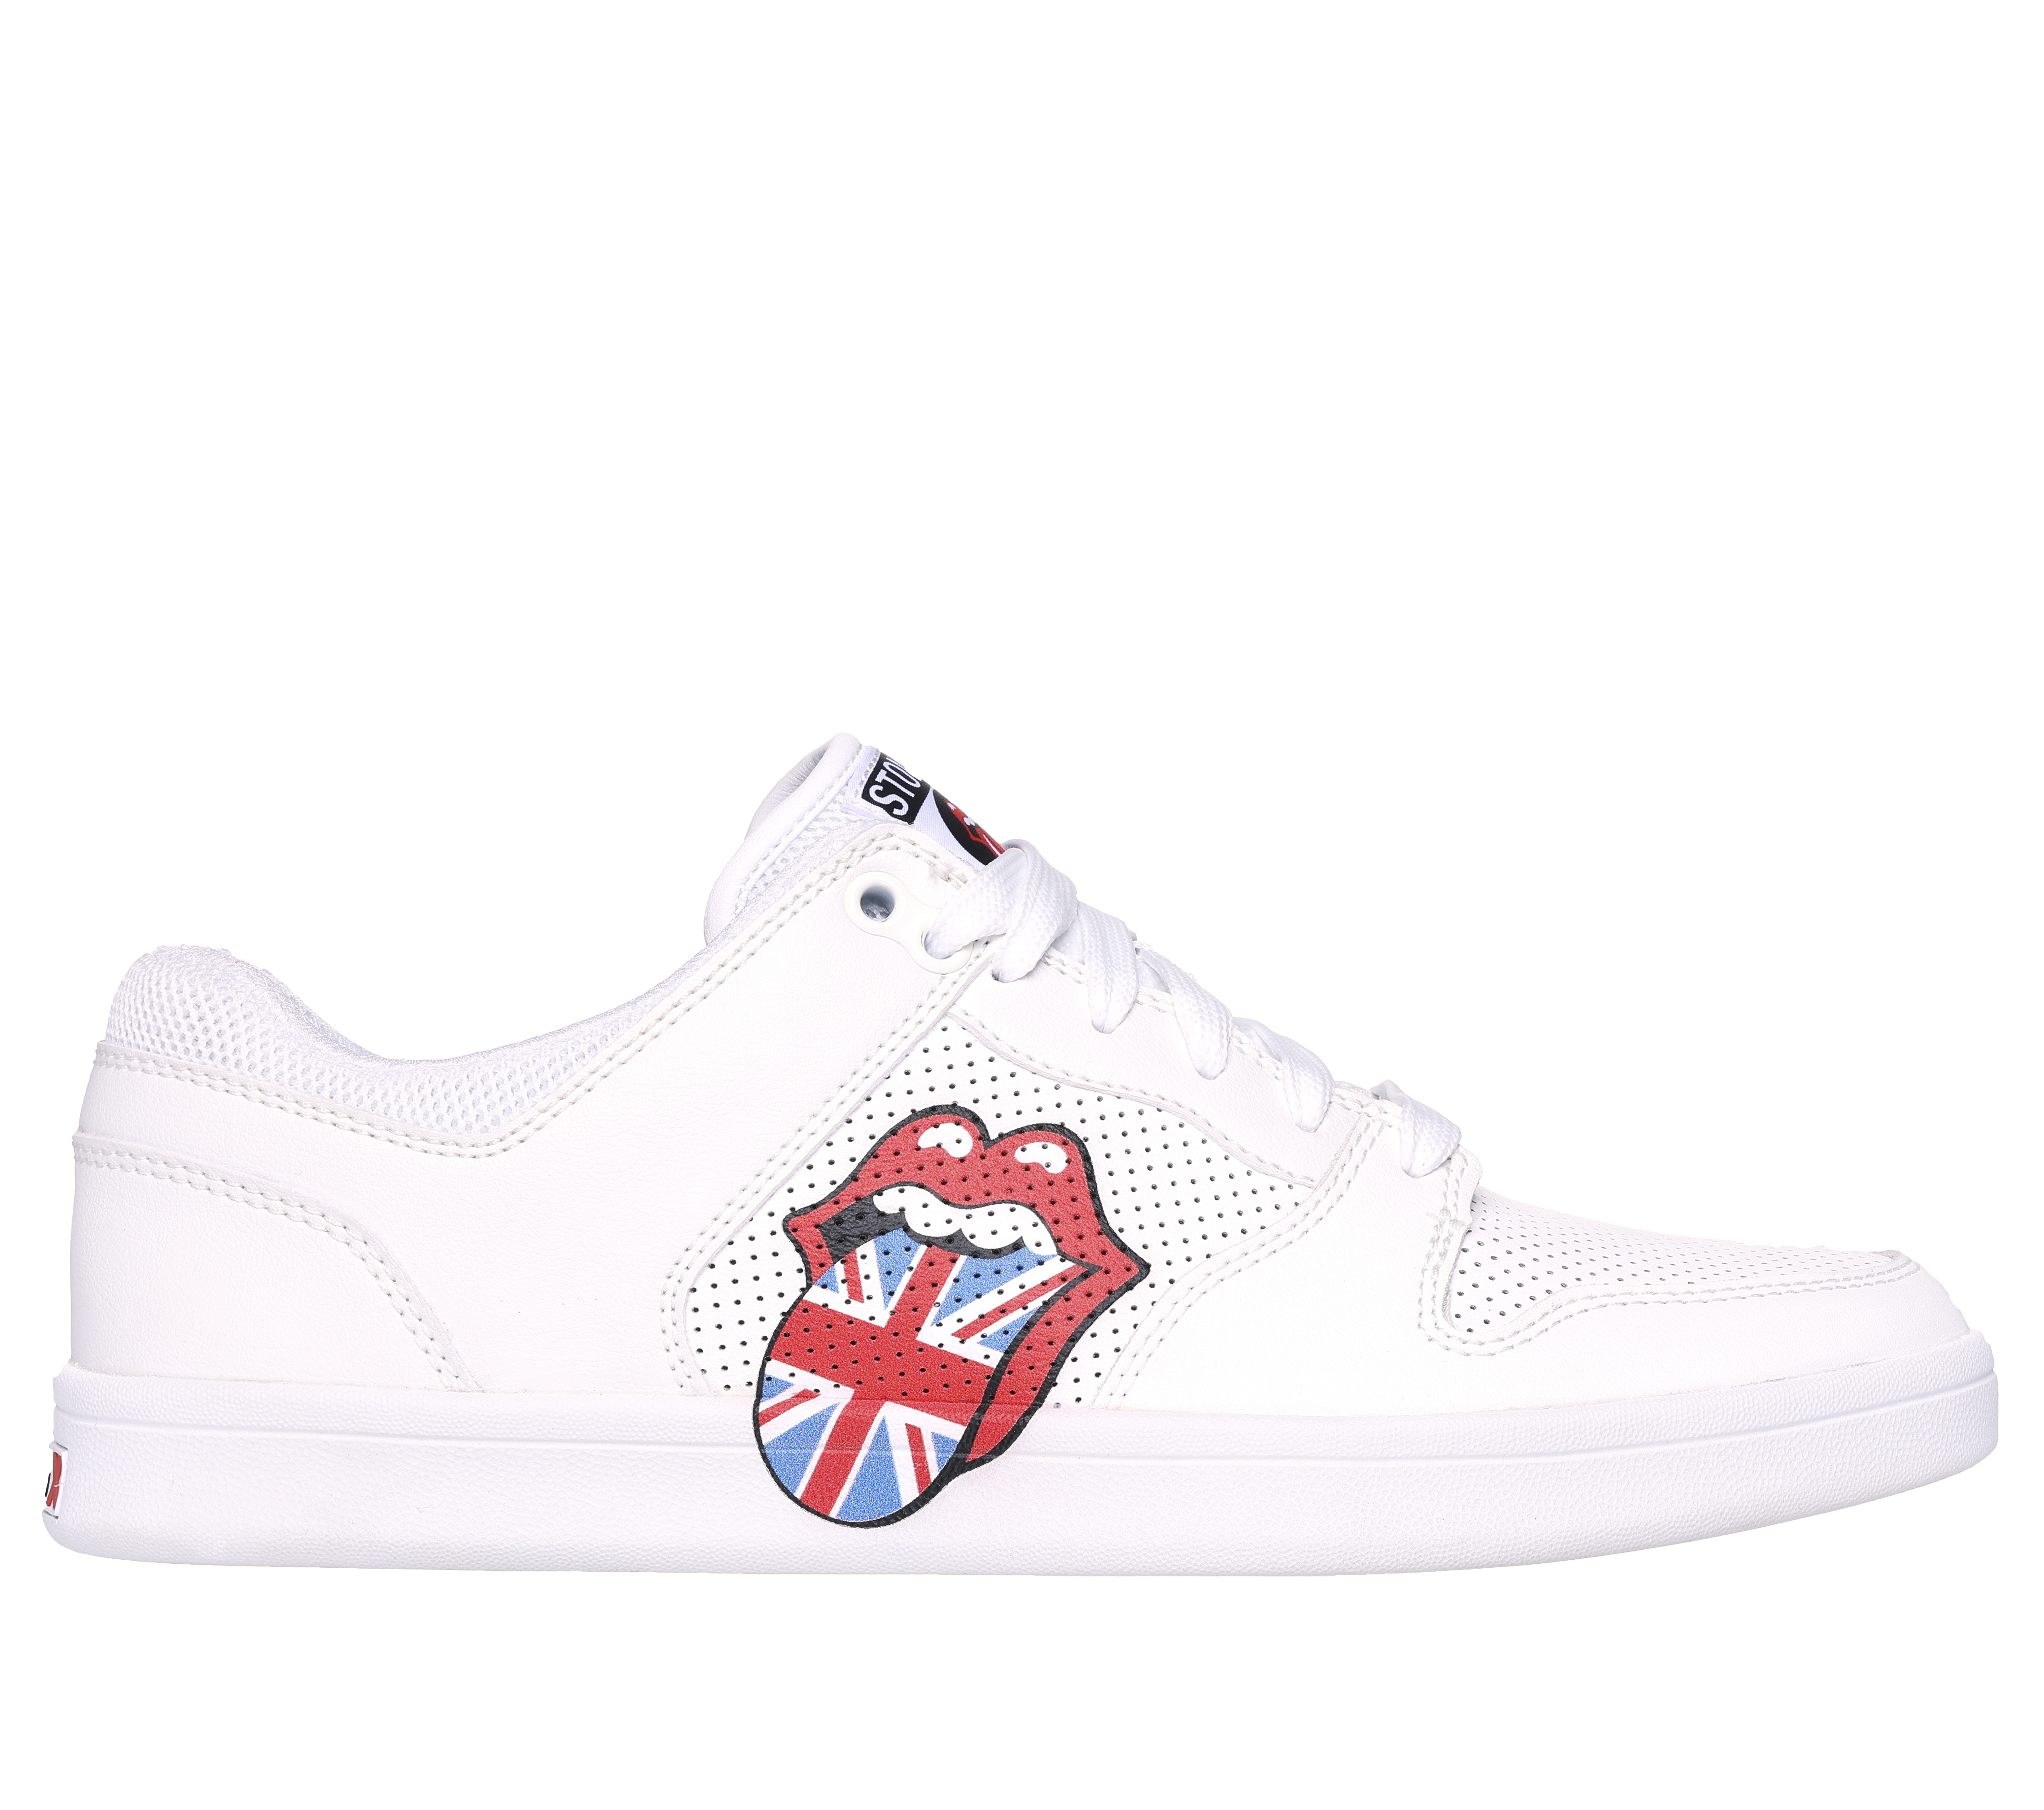 Rolling Stones: Classic Cup - Euro Lick | SKECHERS